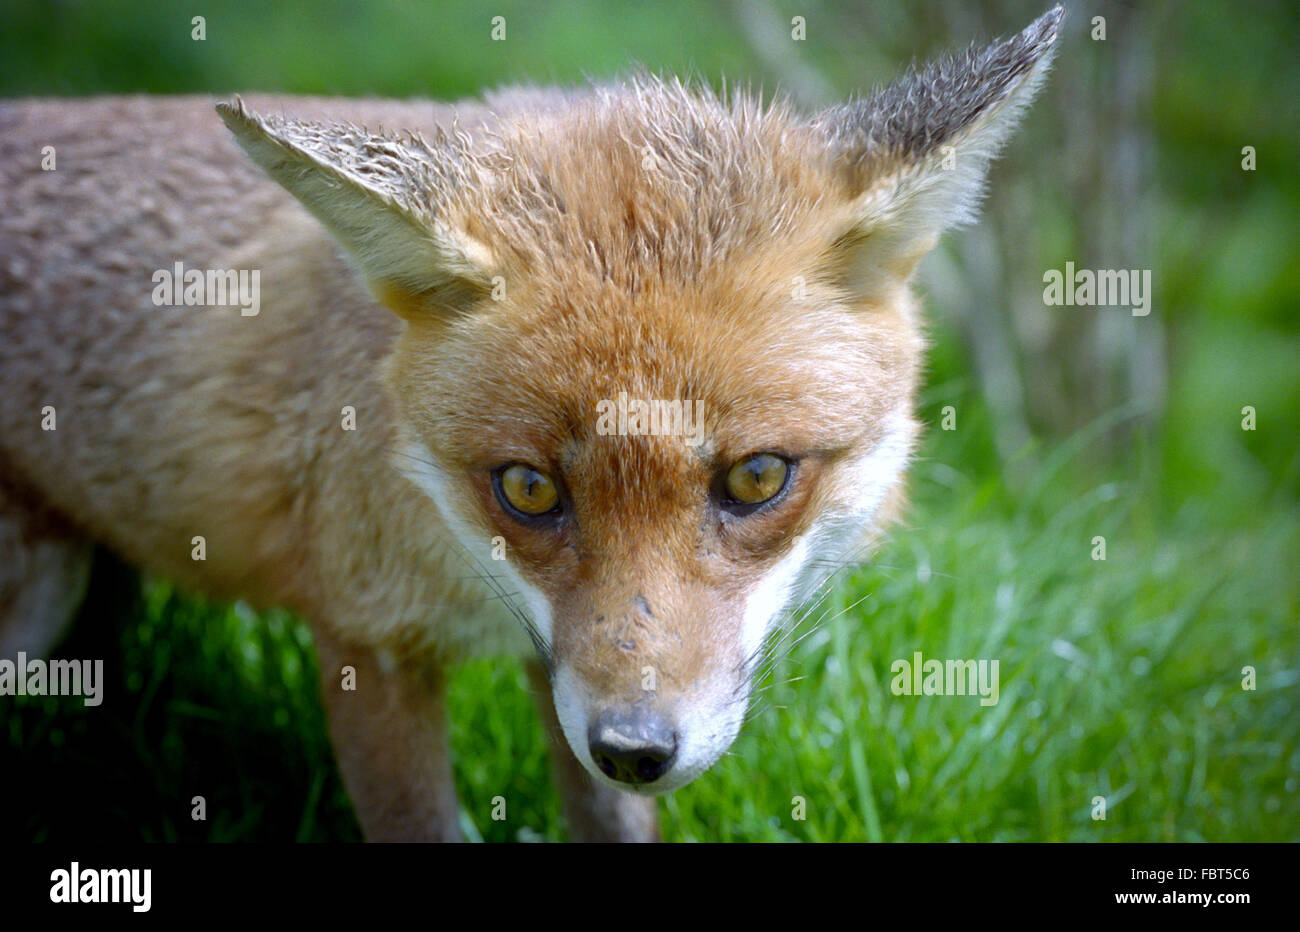 The British Wildlife Centre at Newchapel, Lingfield, Surrey:   A young fox. Stock Photo